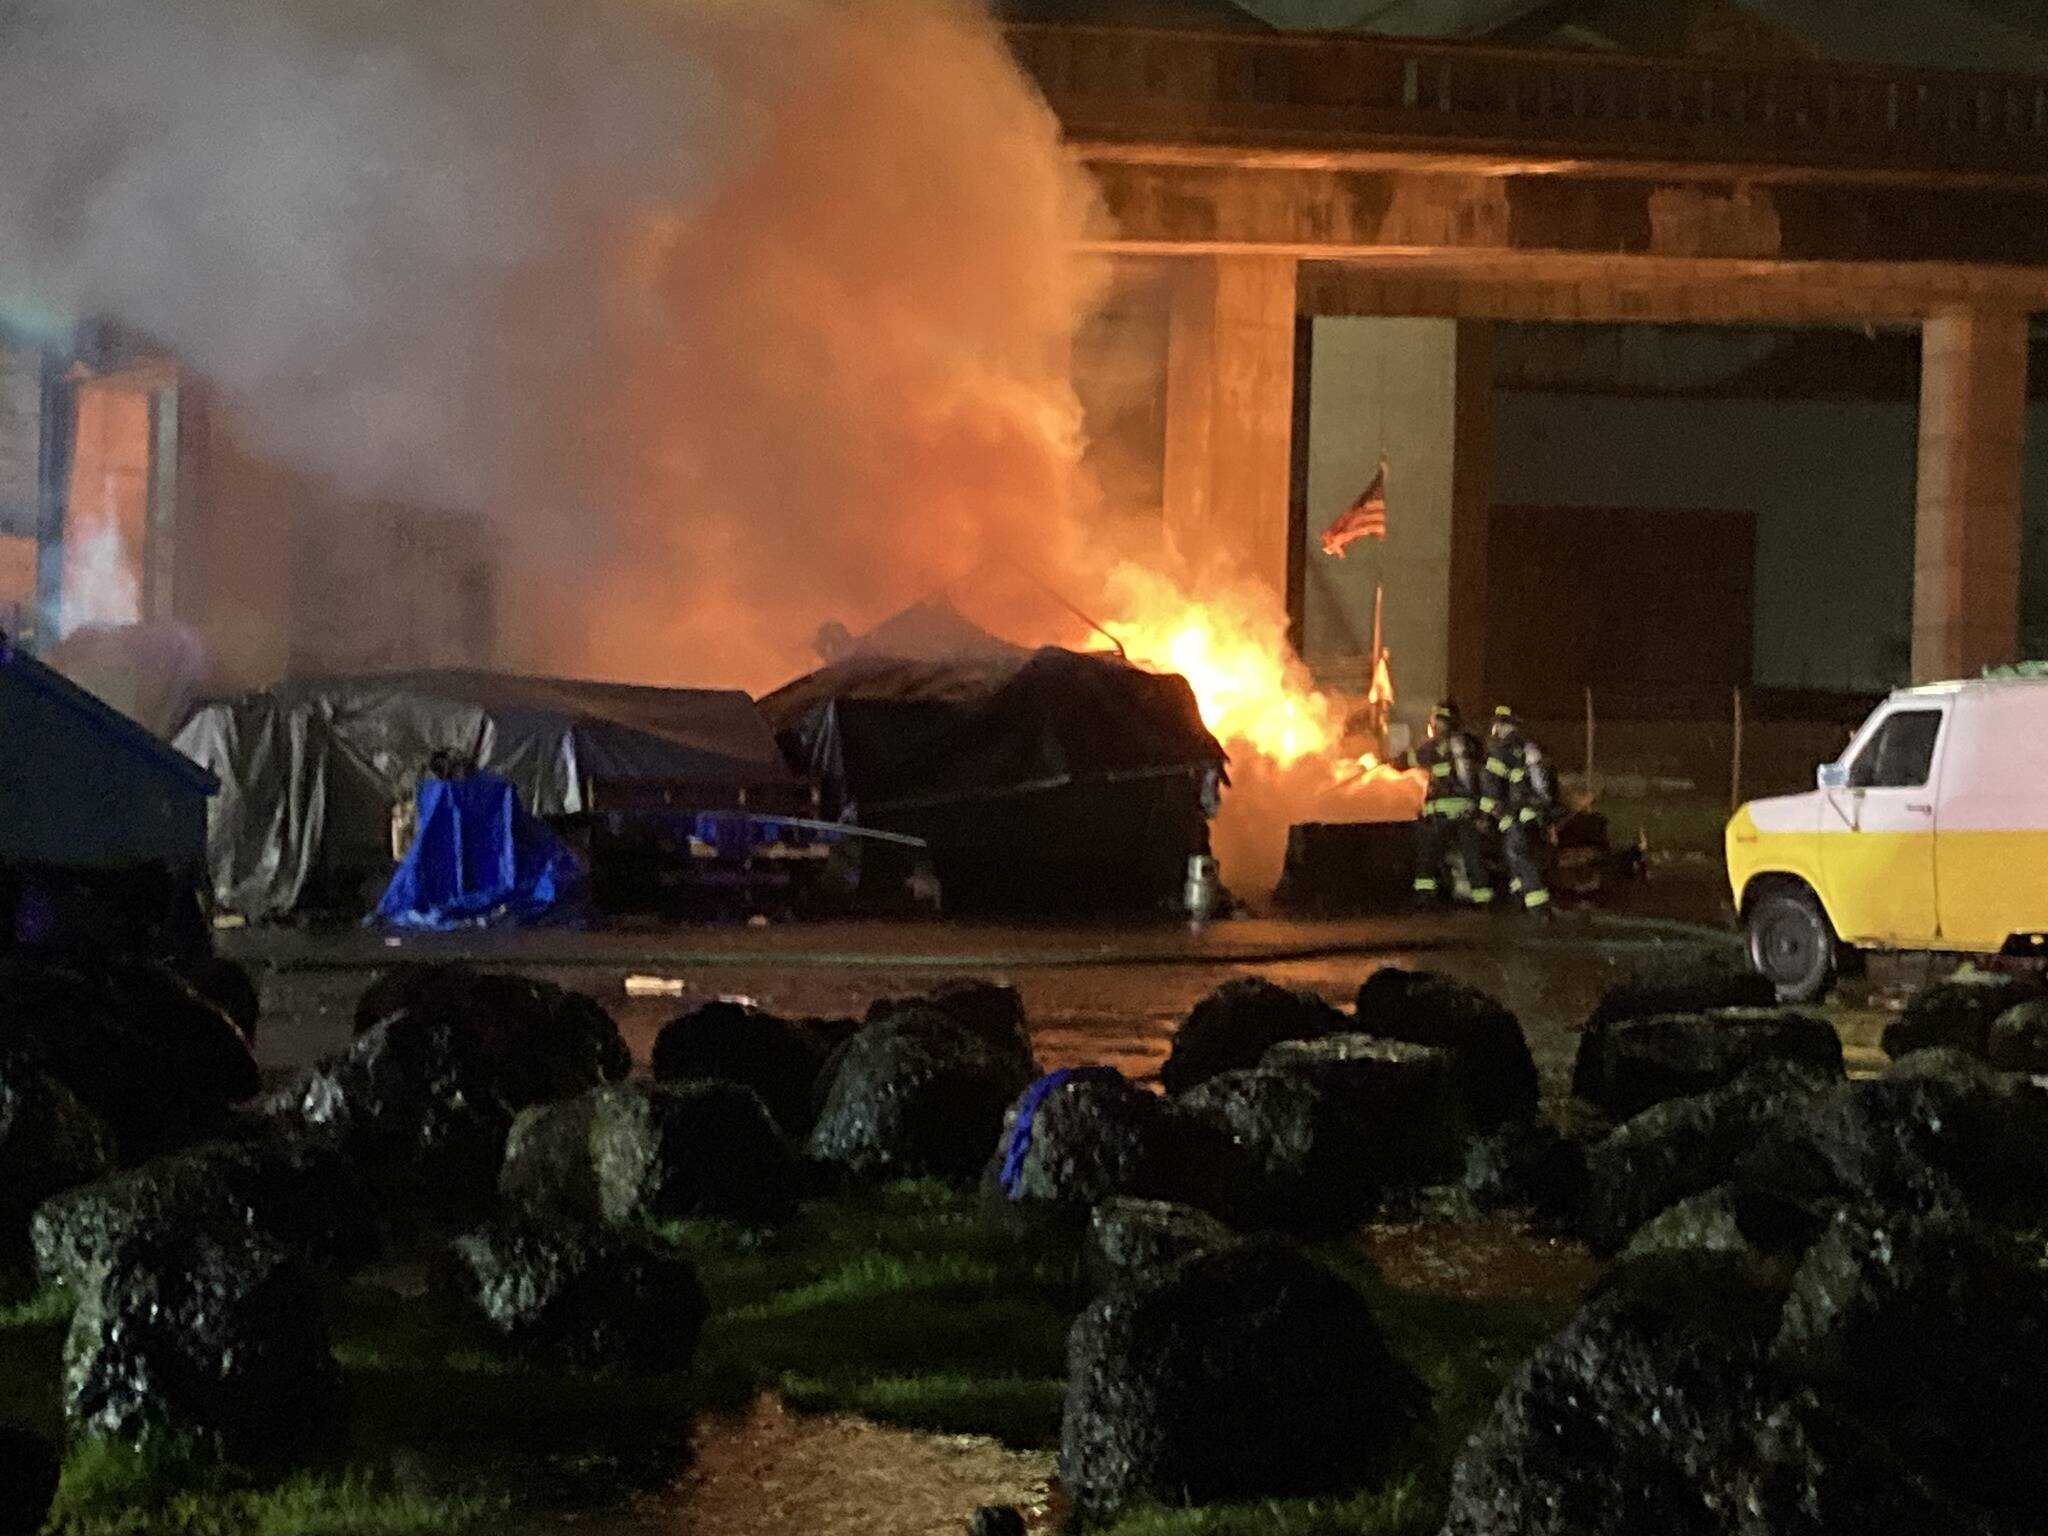 Aberdeen police and fire responded to a fire in a tent near downtown early Friday morning. (Courtesy photo / APD)